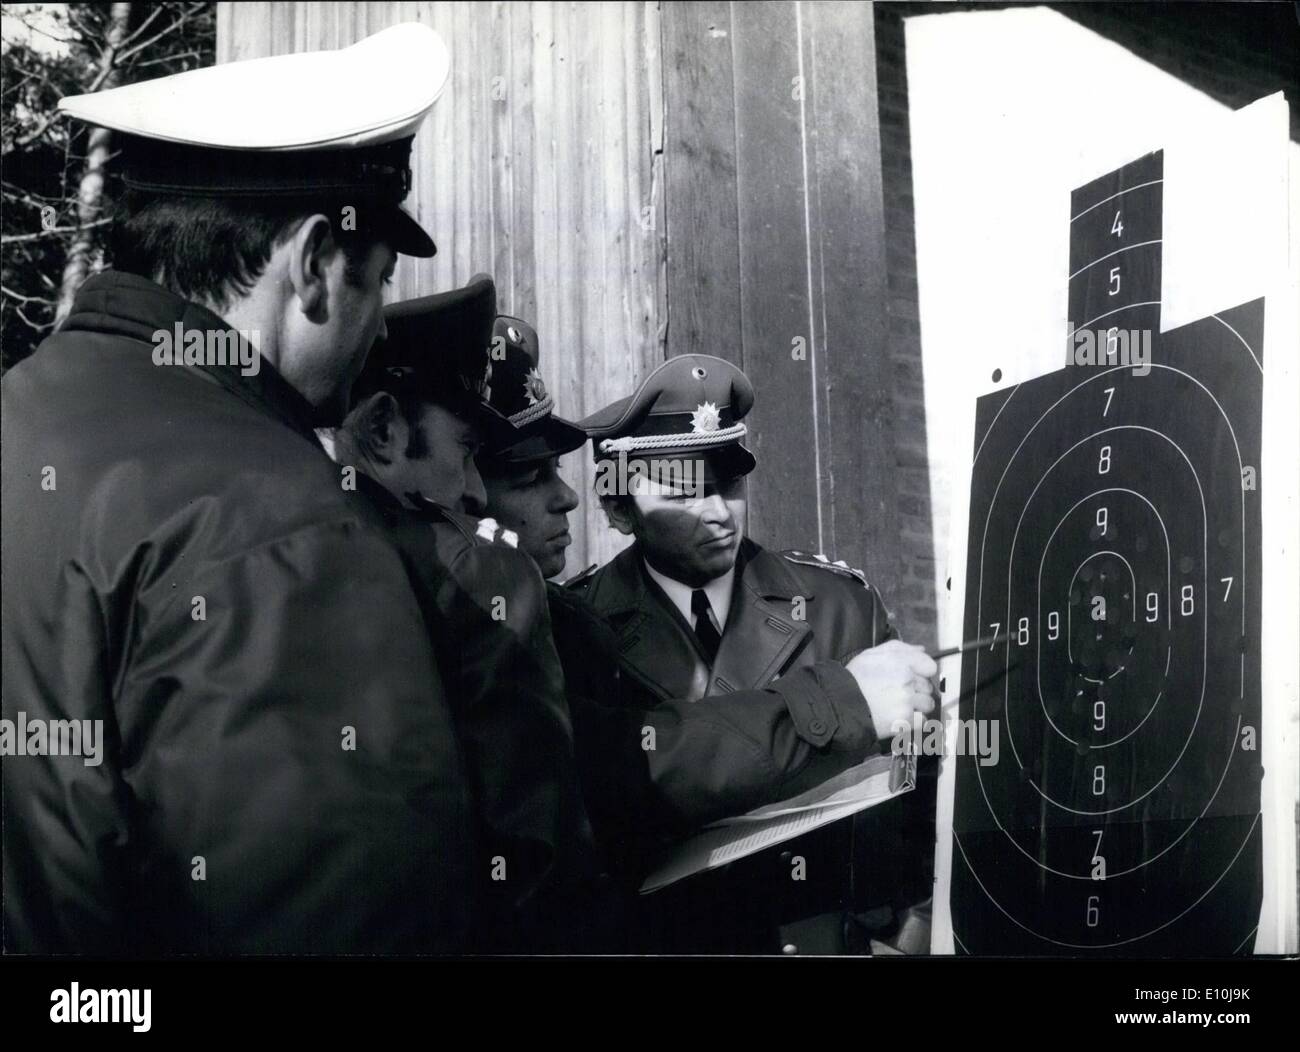 Dec. 12, 1972 - Sharpshooter-training to counter terrorism and force: The Munich bloodbath during the Olympic Games 1972 caused Stock Photo